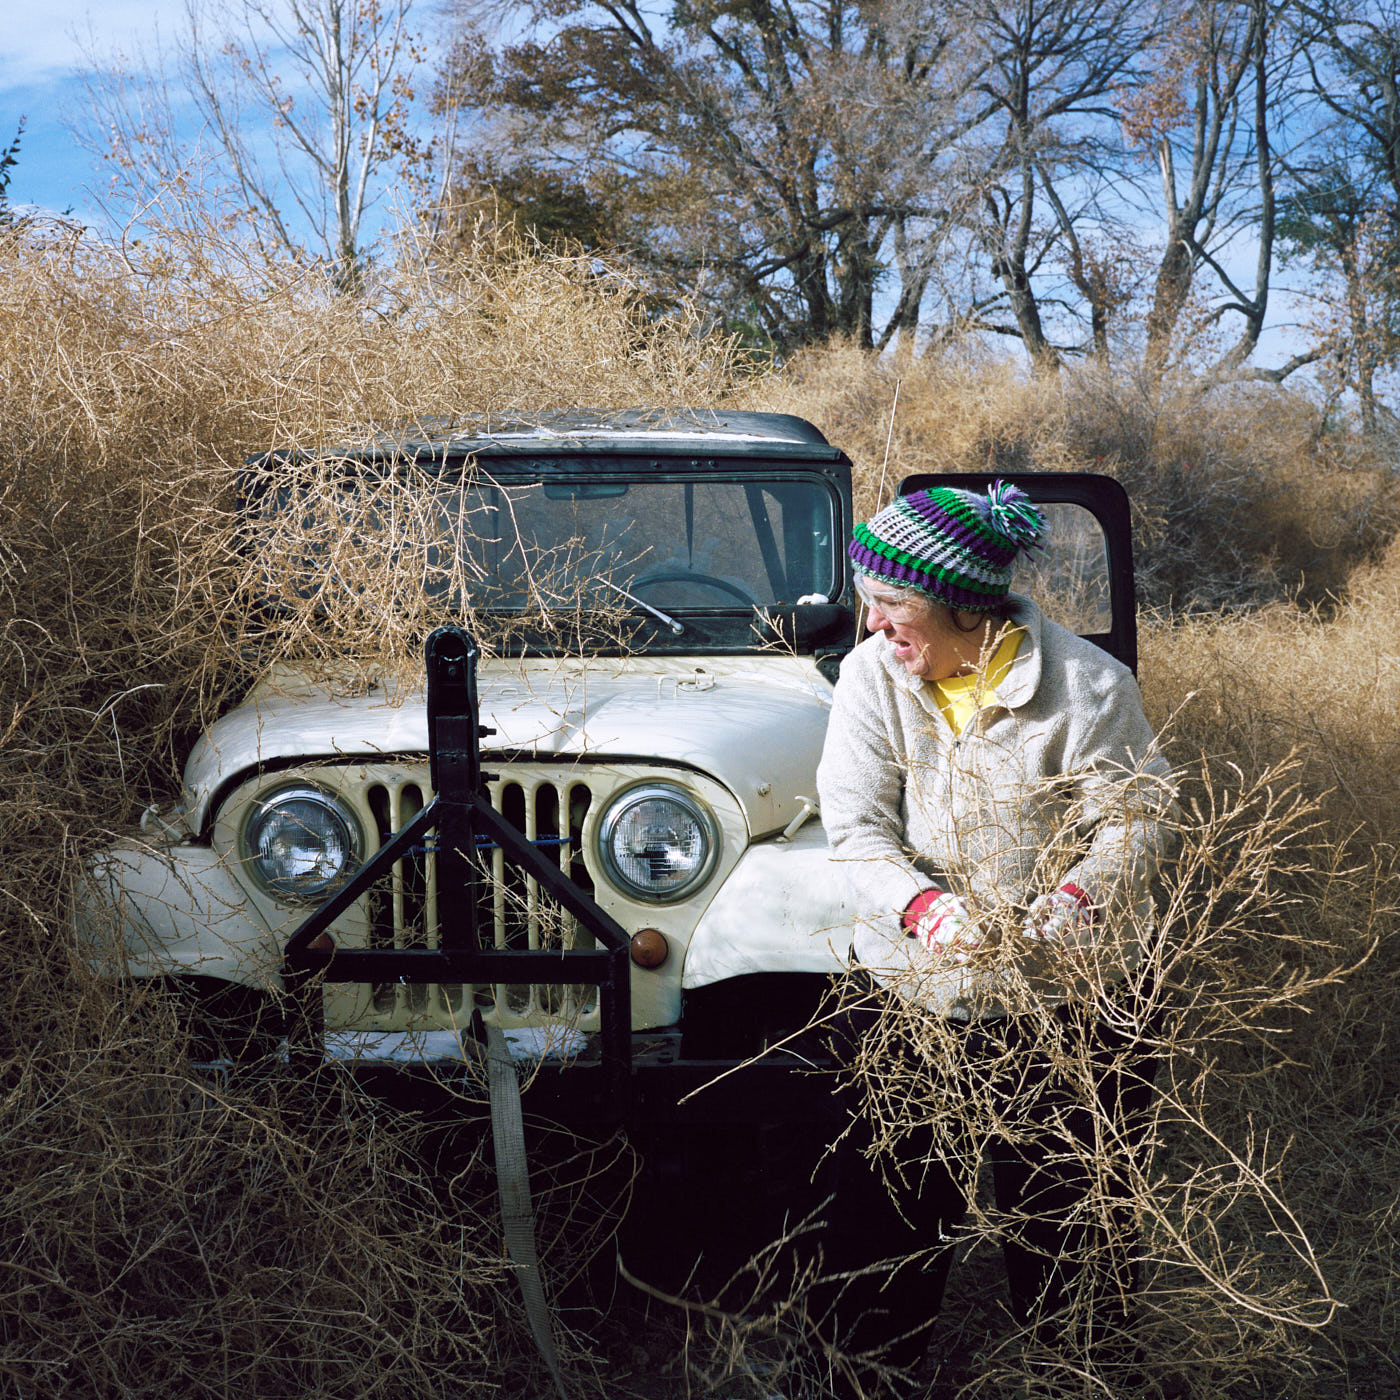 Woman unburies Jeep from tumbleweeds